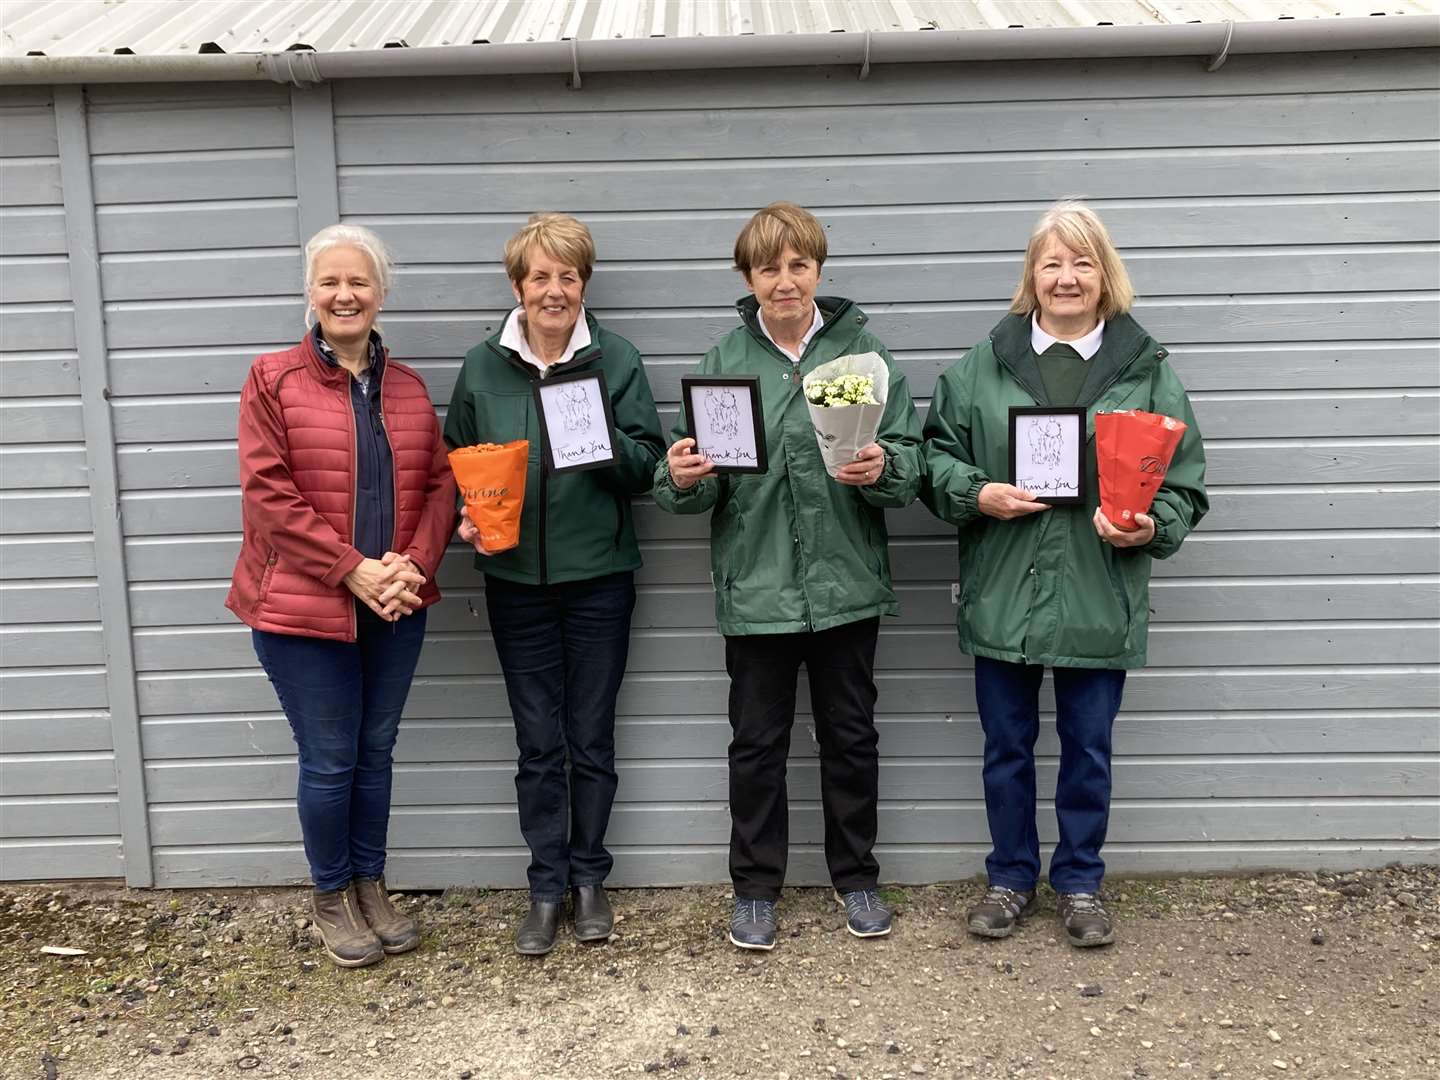 From left to right: Regional chair for Grampian and Highland RDA Barbara Manson handed over long-service awards to Gladys Gunn, Moira Stephen and Helen Harper for over 30 years volunteering with Caithness RDA. Missing from the photograph are Jessie Allan and Nora Manson.